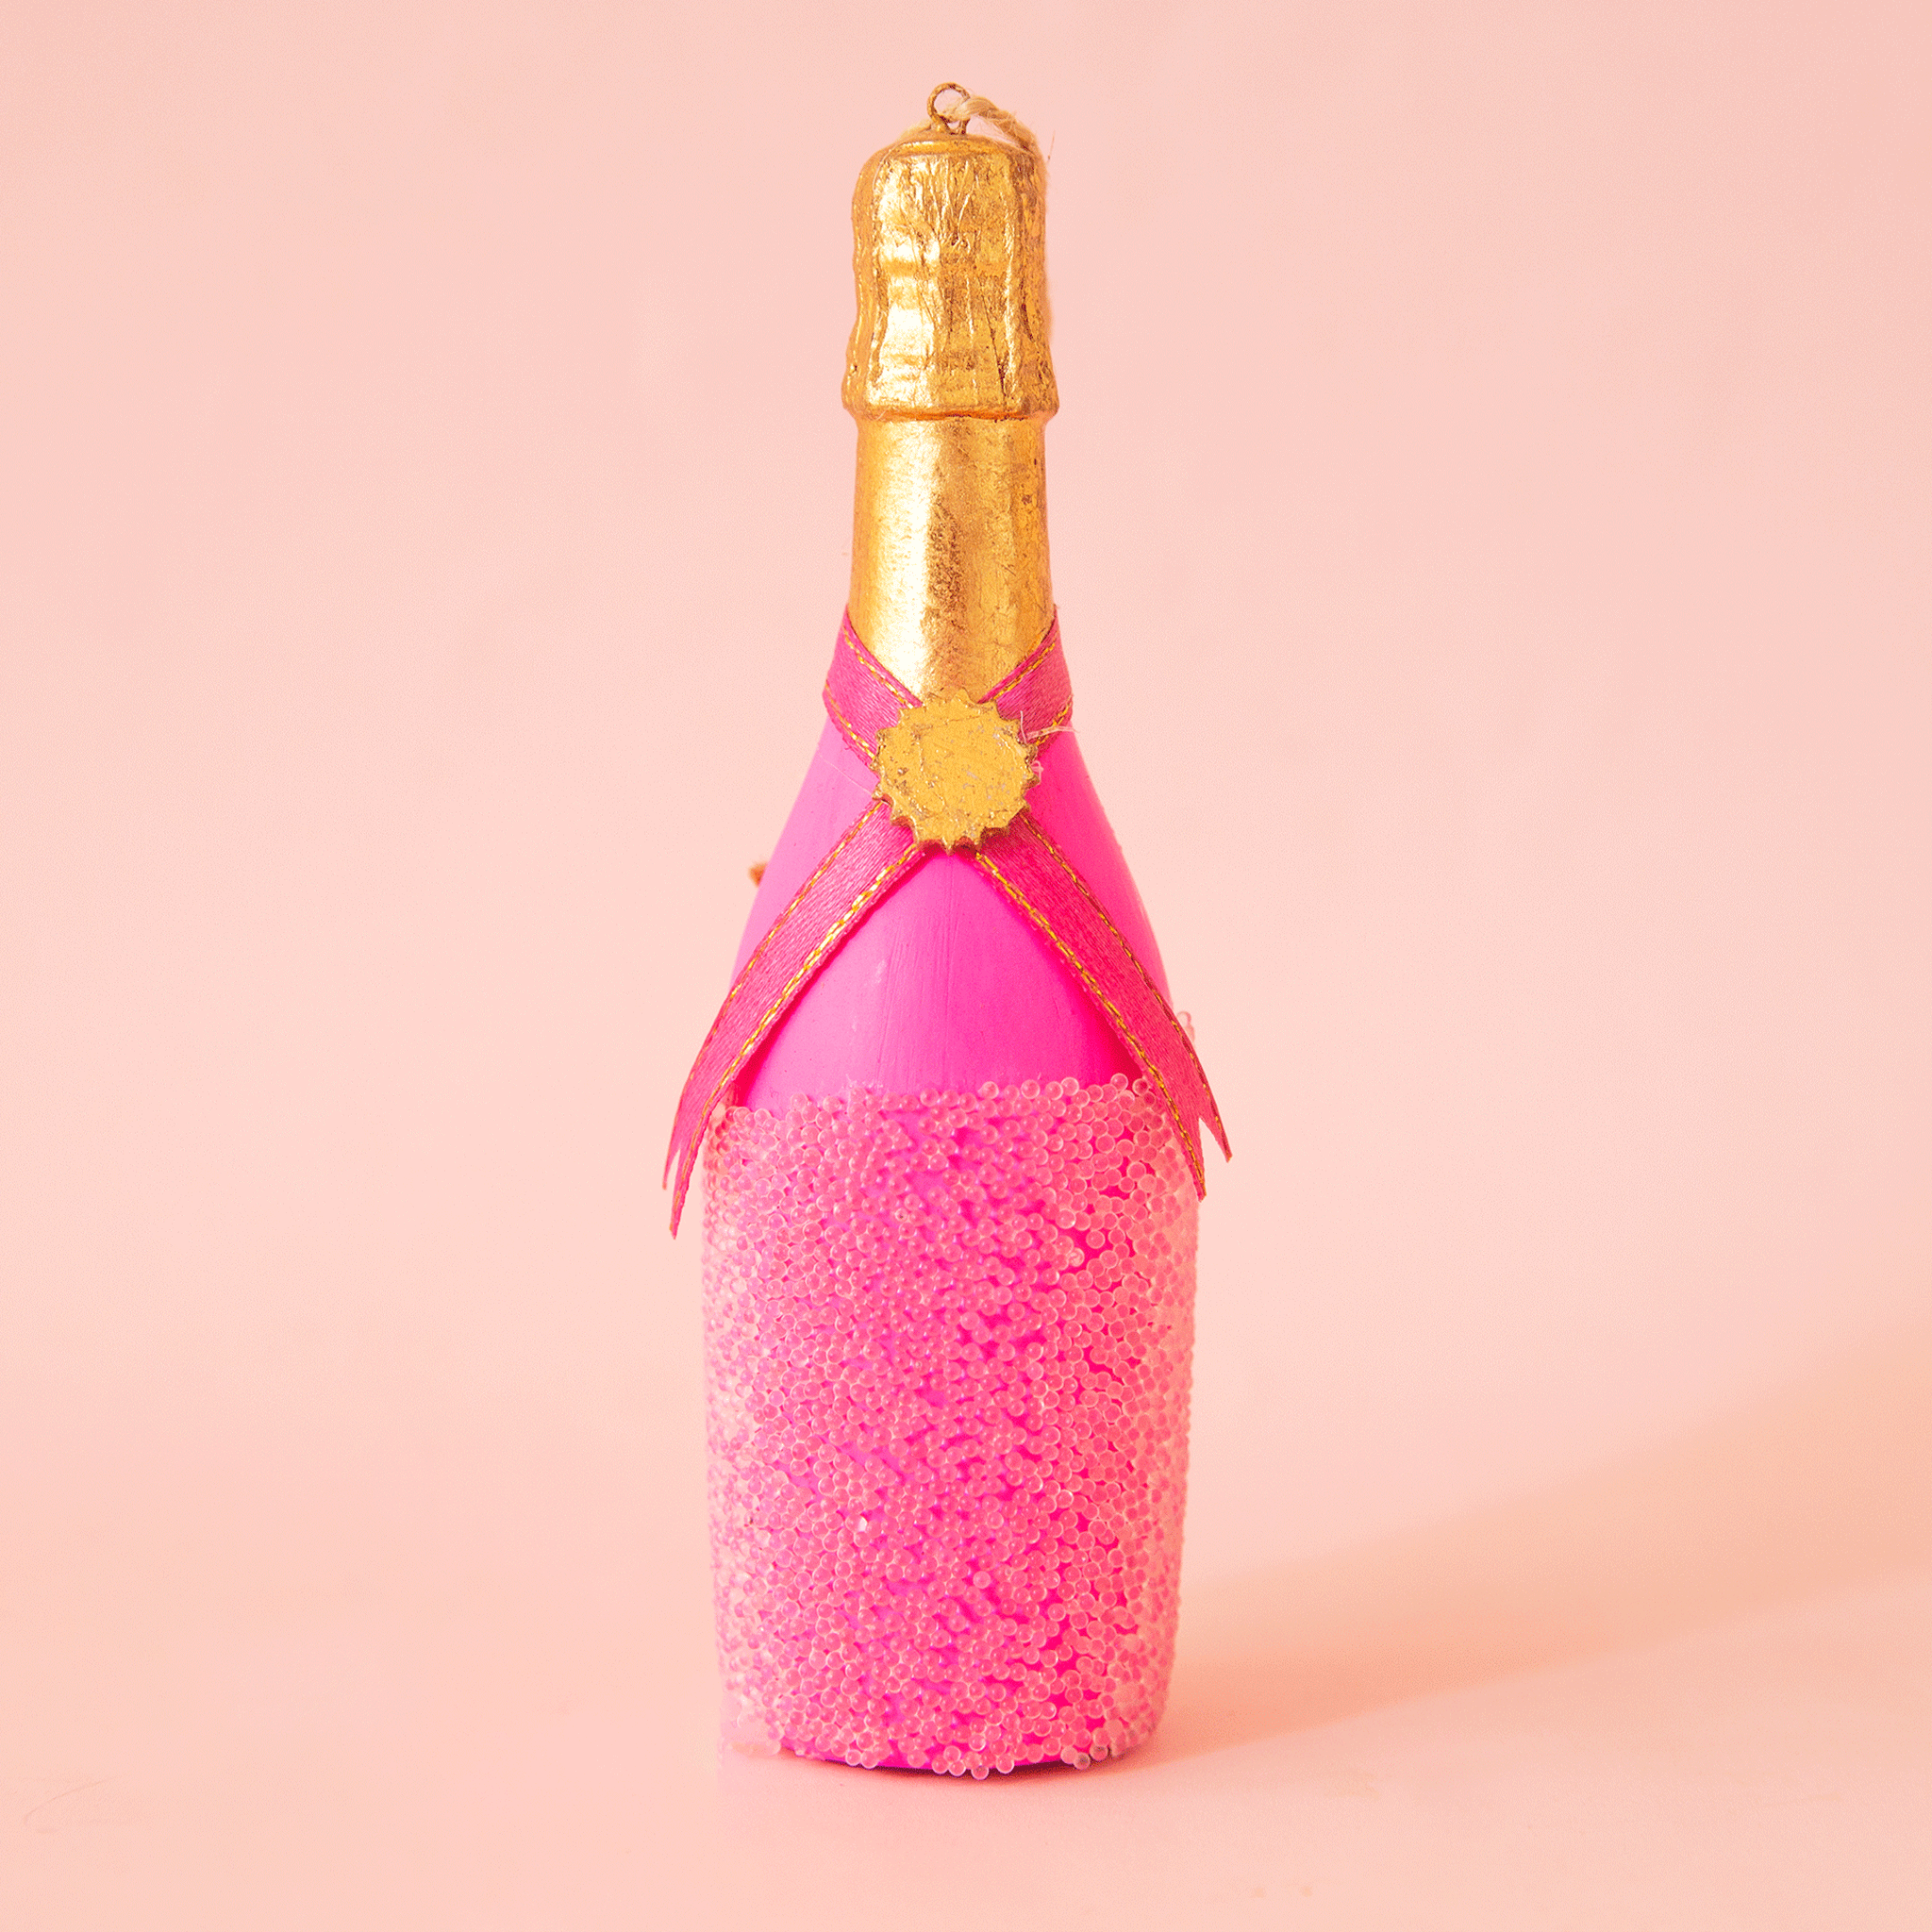 On a peach background is a resin champagne bottle shaped ornament with a pink bottle and a gold top.